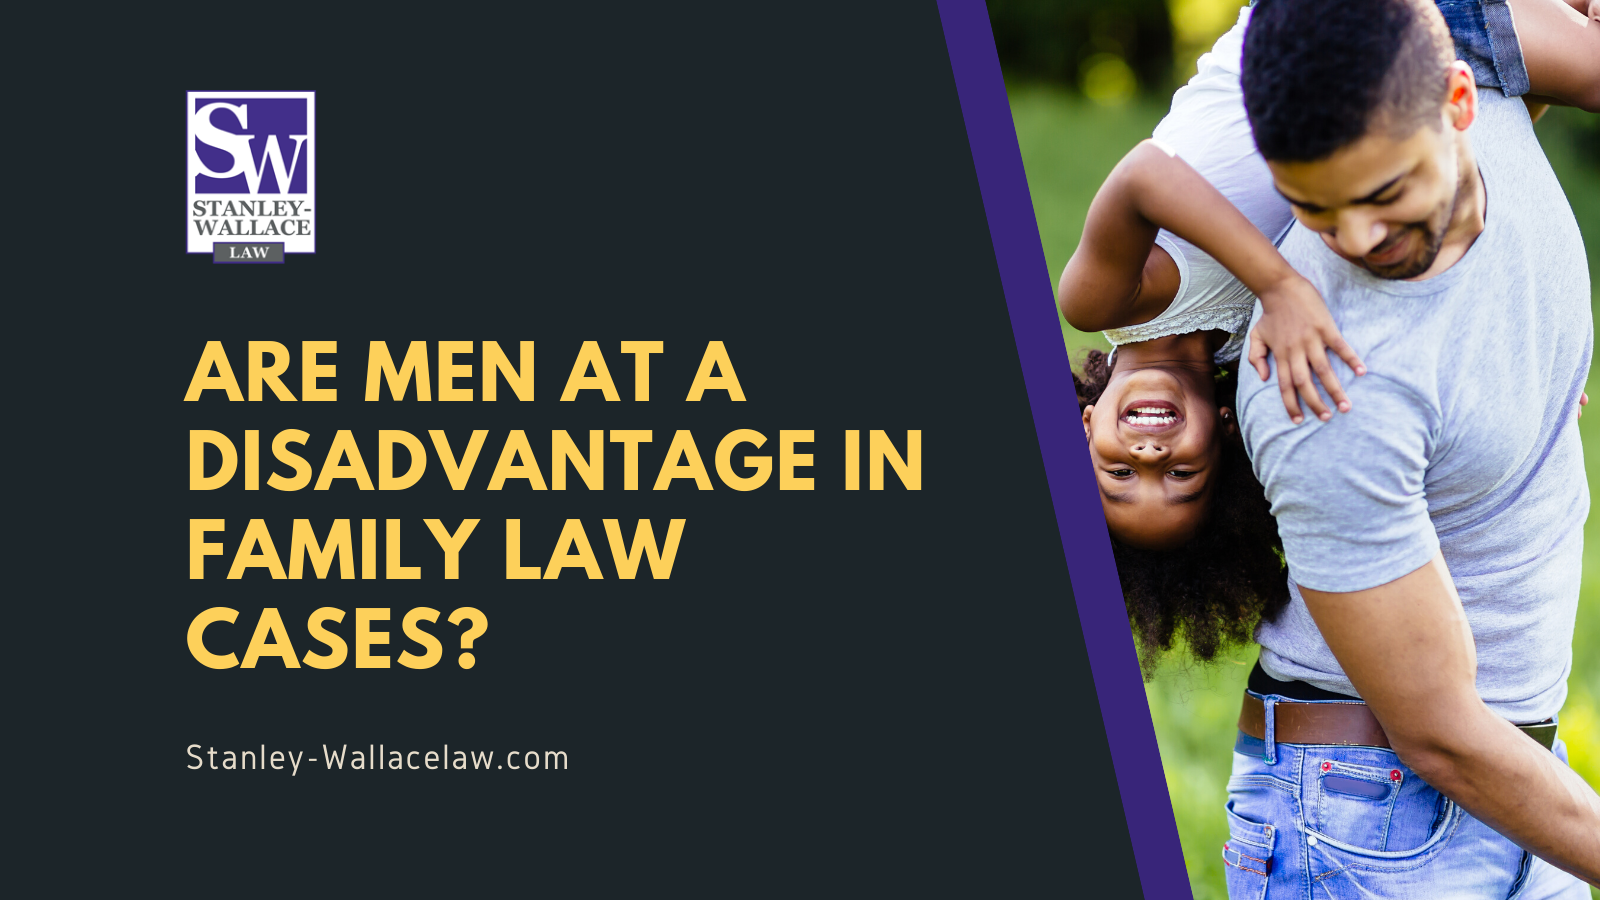 Are Men at a Disadvantage in Family Law Cases - Stanley-Wallace Law - slidell louisiana